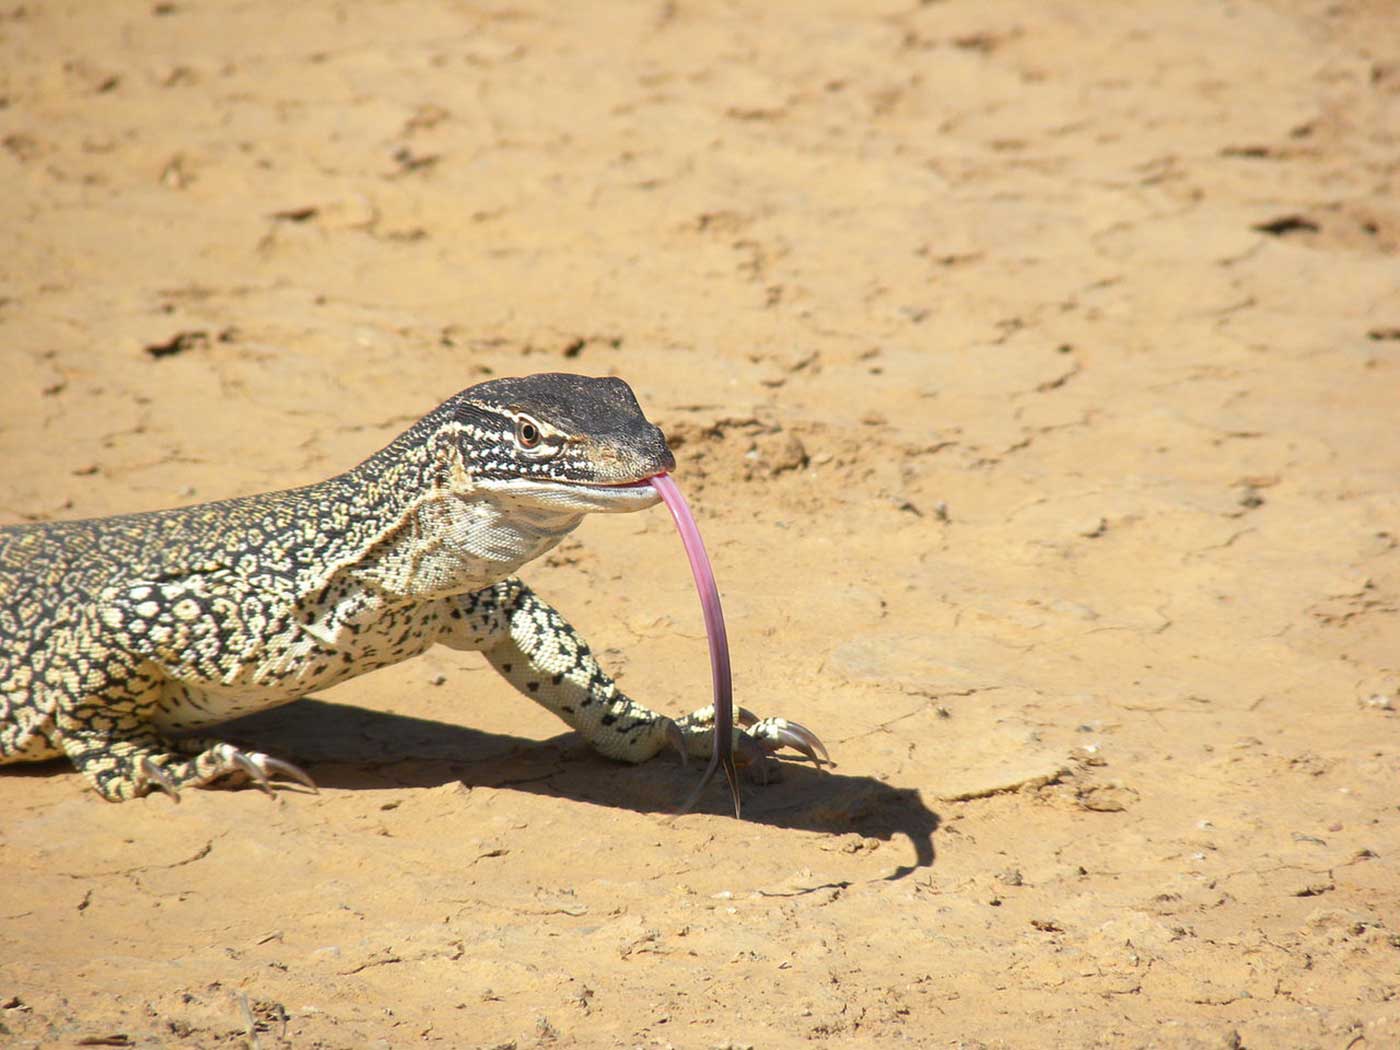 Colour photograph showing a lizard on dry ground. The front half of the lizard is visible. It has yellow and grey skin, darker on the head, and its forked tongue extends almost to the ground. - click to view larger image